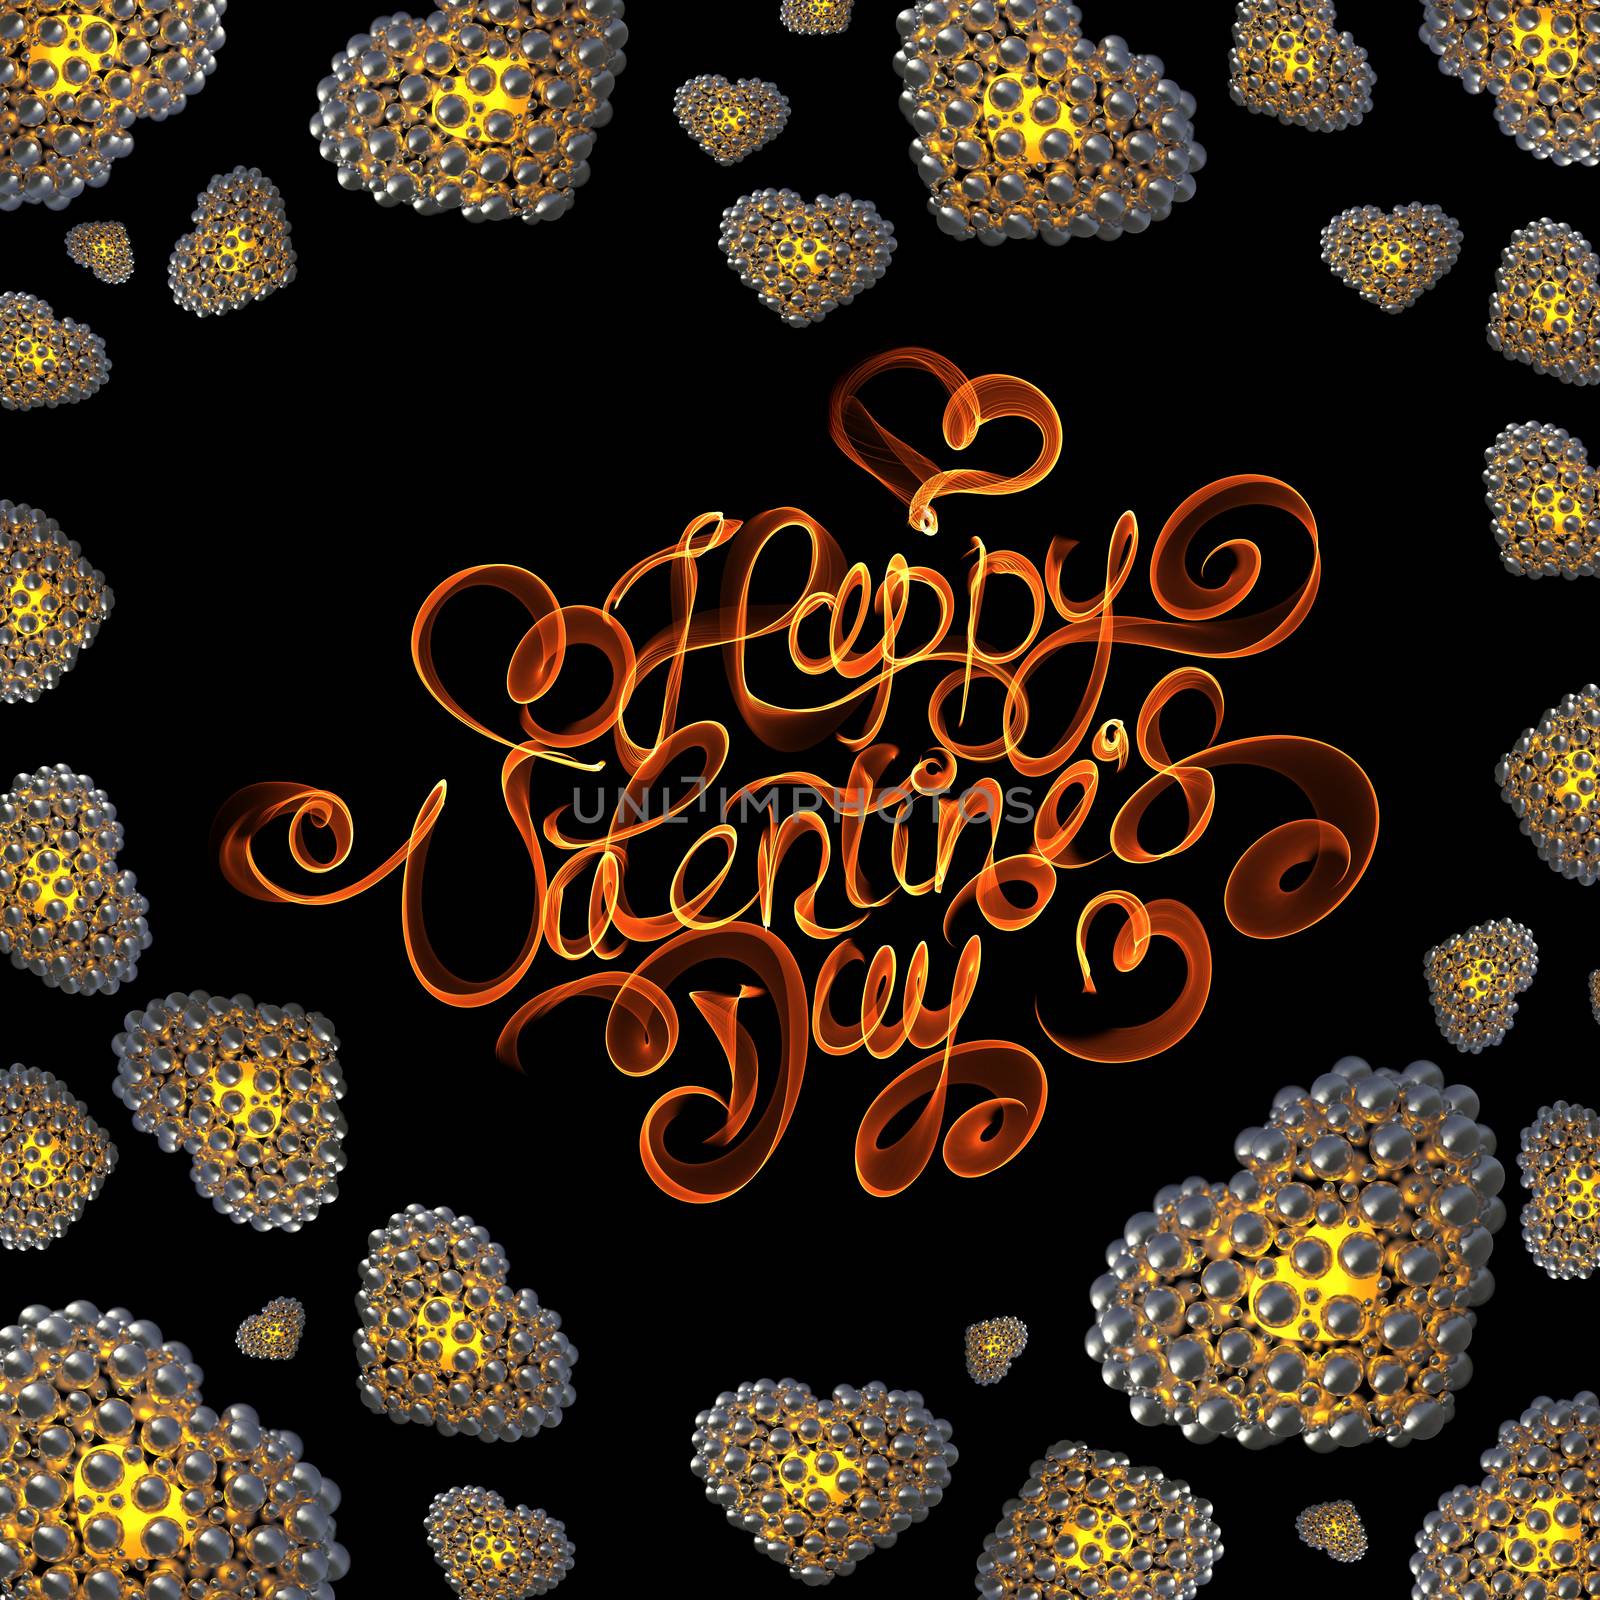 metal Gold hearts made of spheres isolated on black background. Happy valentines day lettering written by fire of smoke. 3d illustration by skrotov